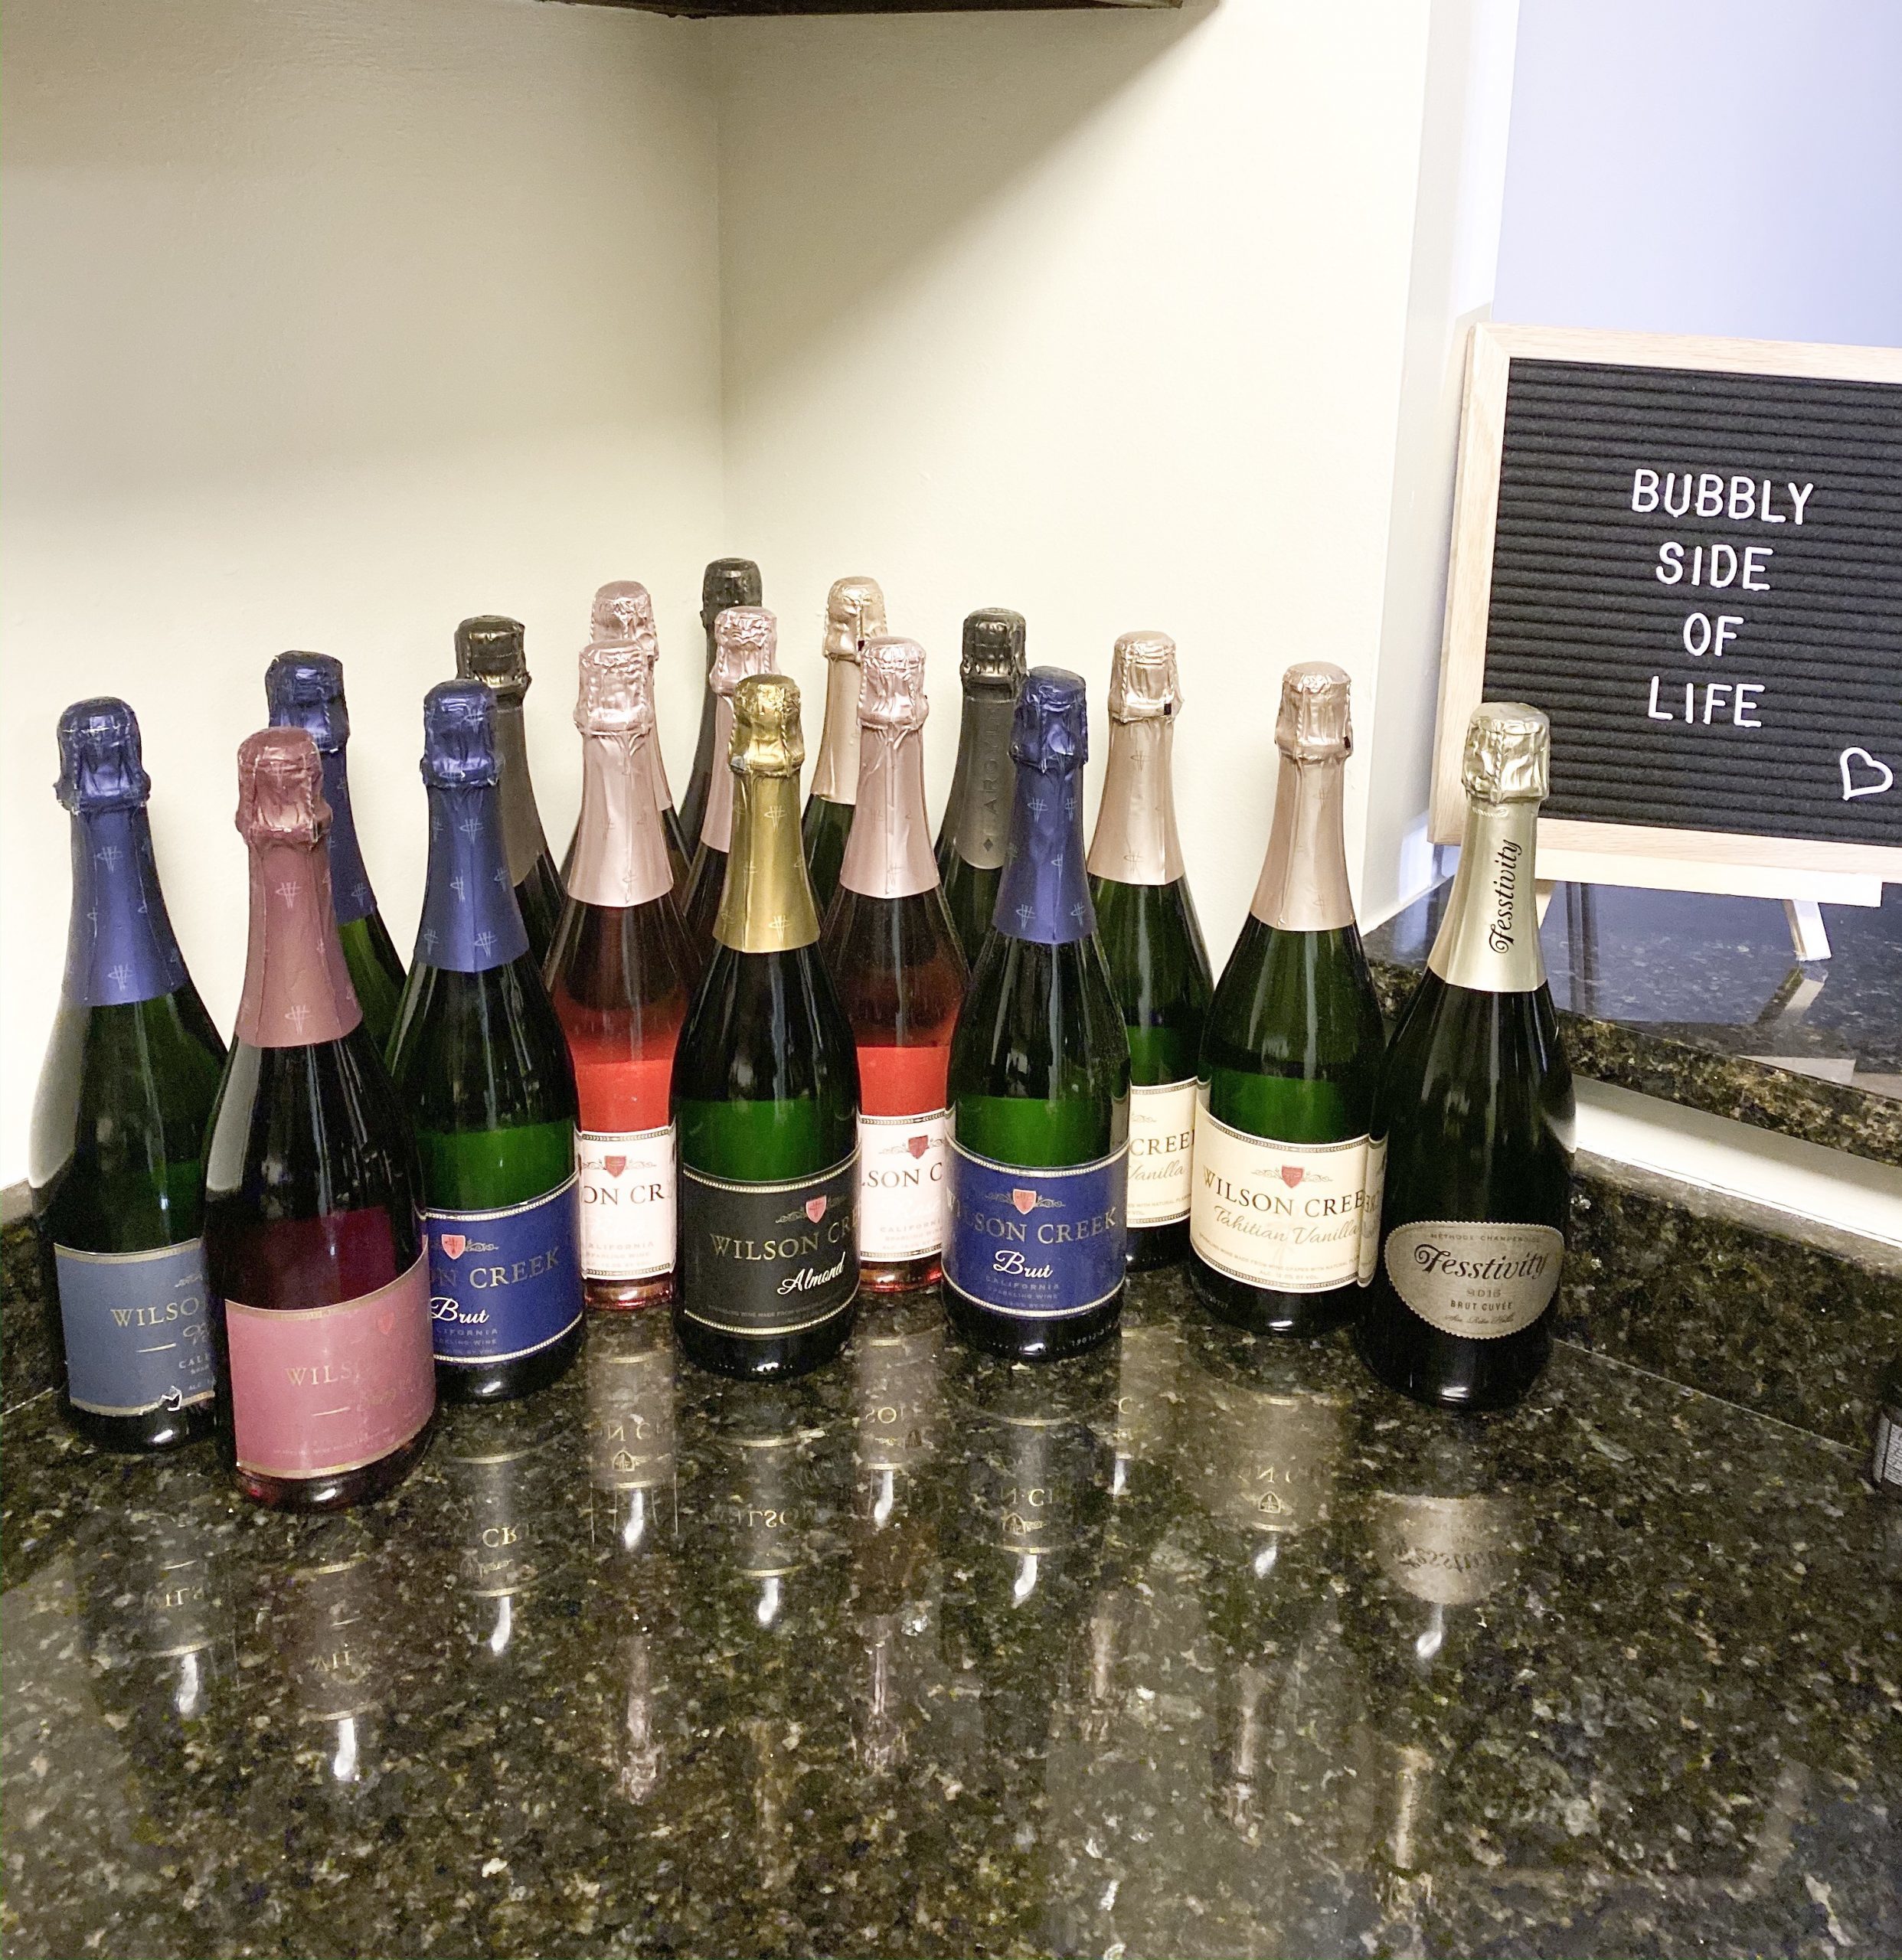 The Bubbly Side of Life's collection of Sparkling Wines from the Wilson Creek Winery